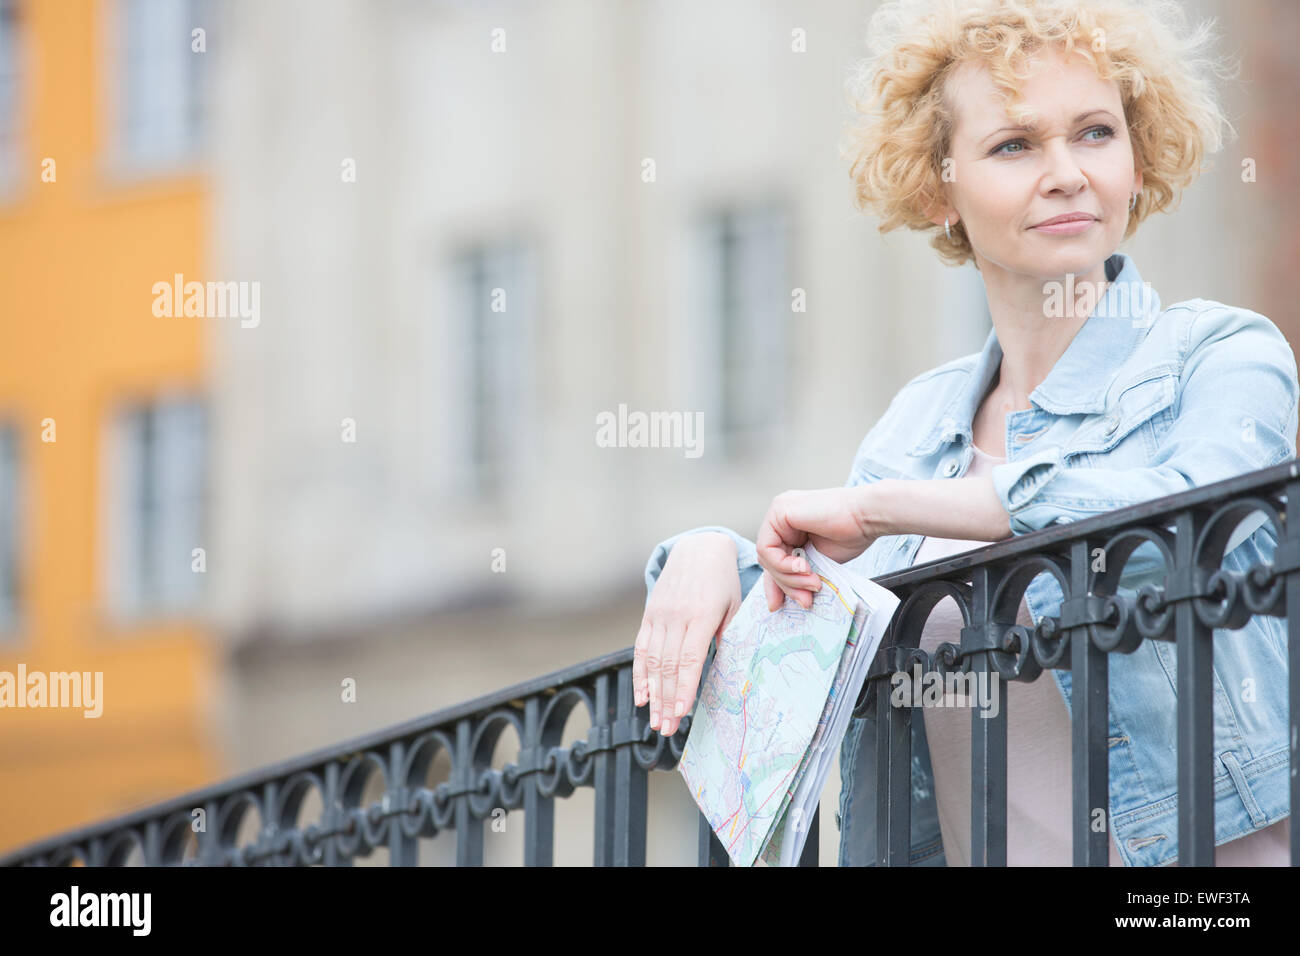 Thoughtful middle-aged woman holding map while leaning on railing Stock Photo